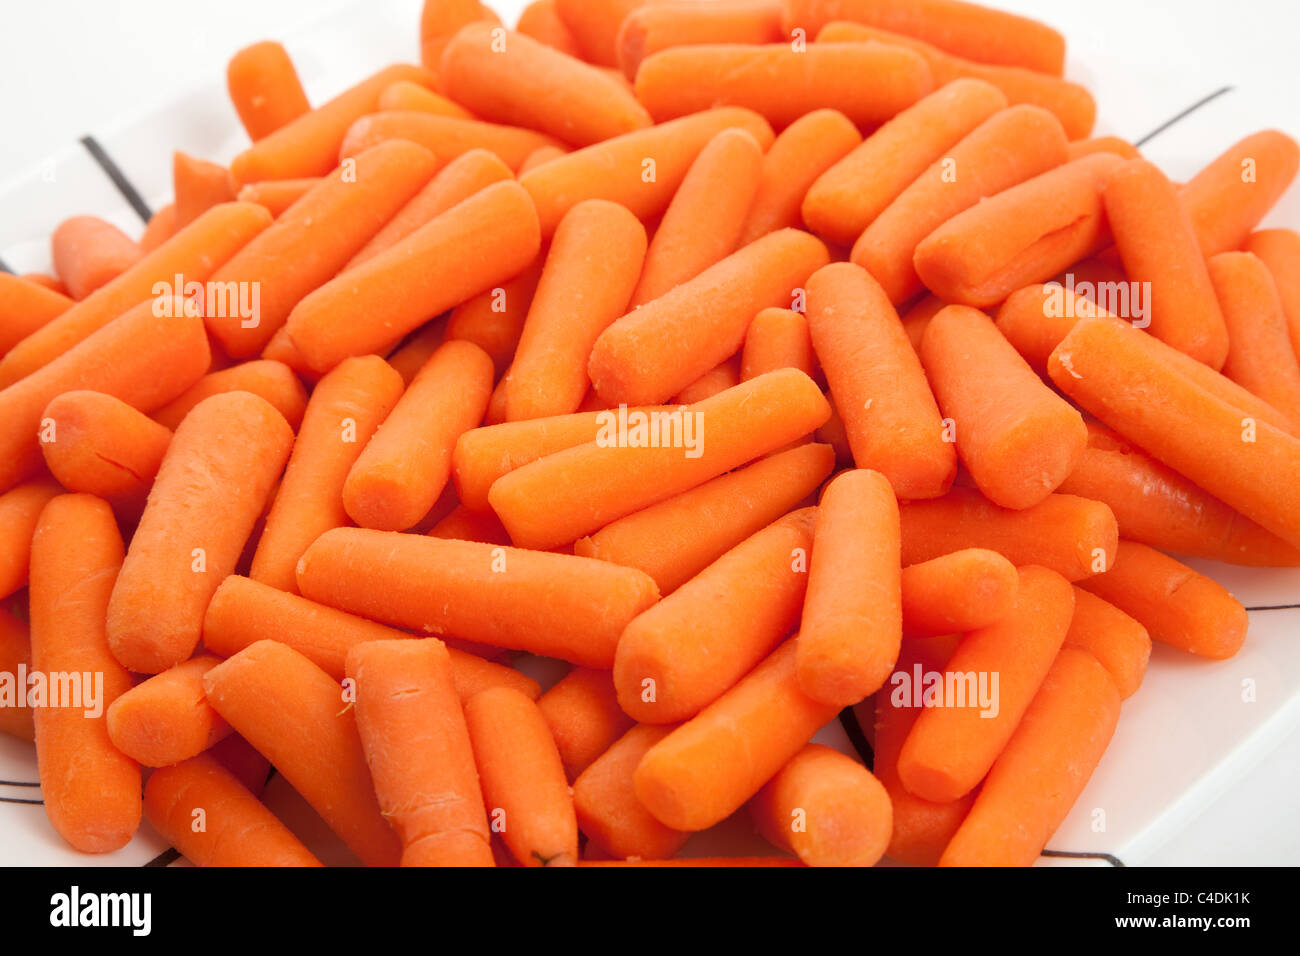 Carrot close up for background Stock Photo